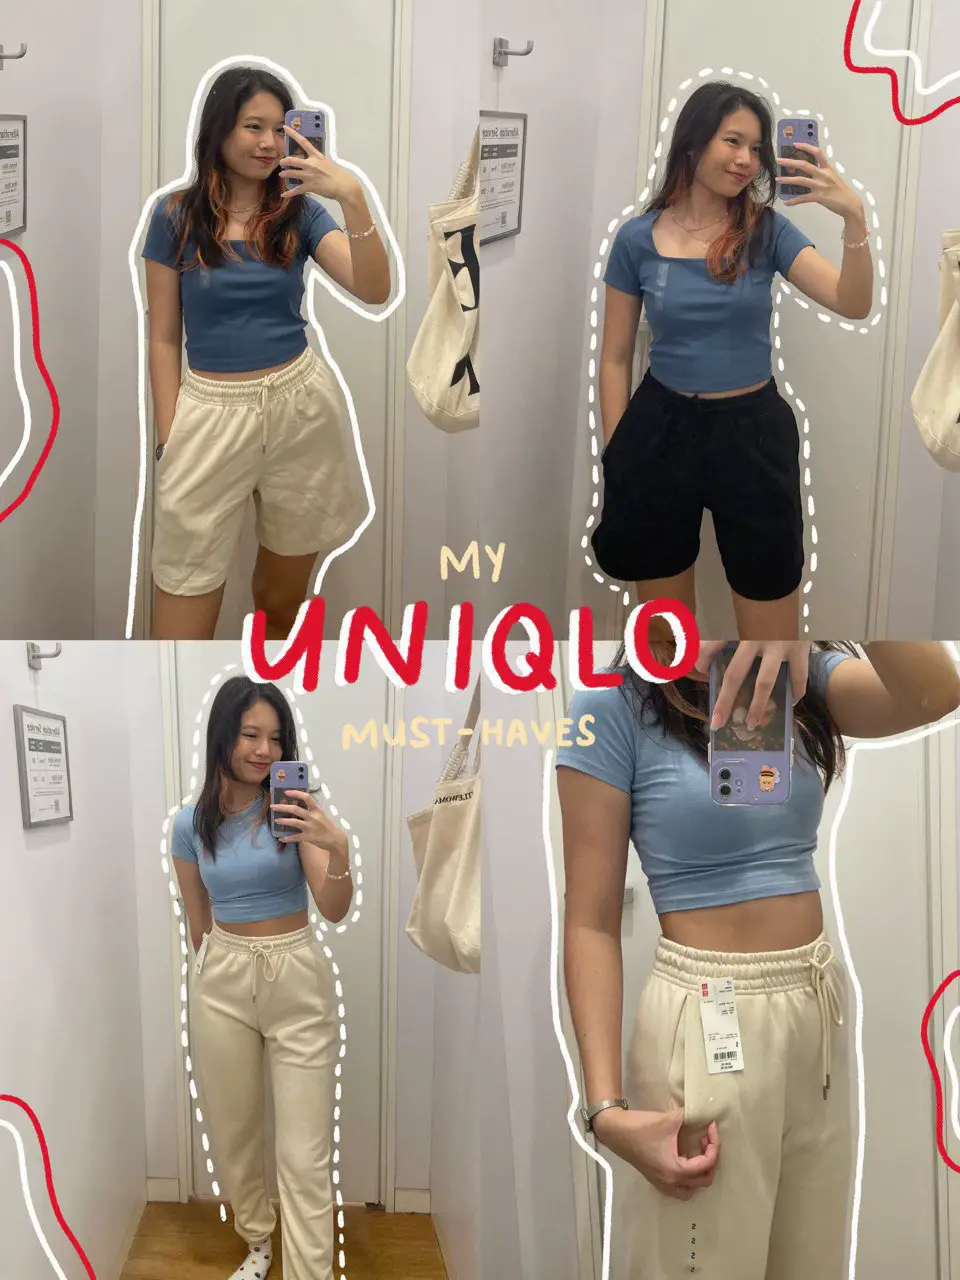 Is Uniqlo Boxer Shorts the new trend? 😳